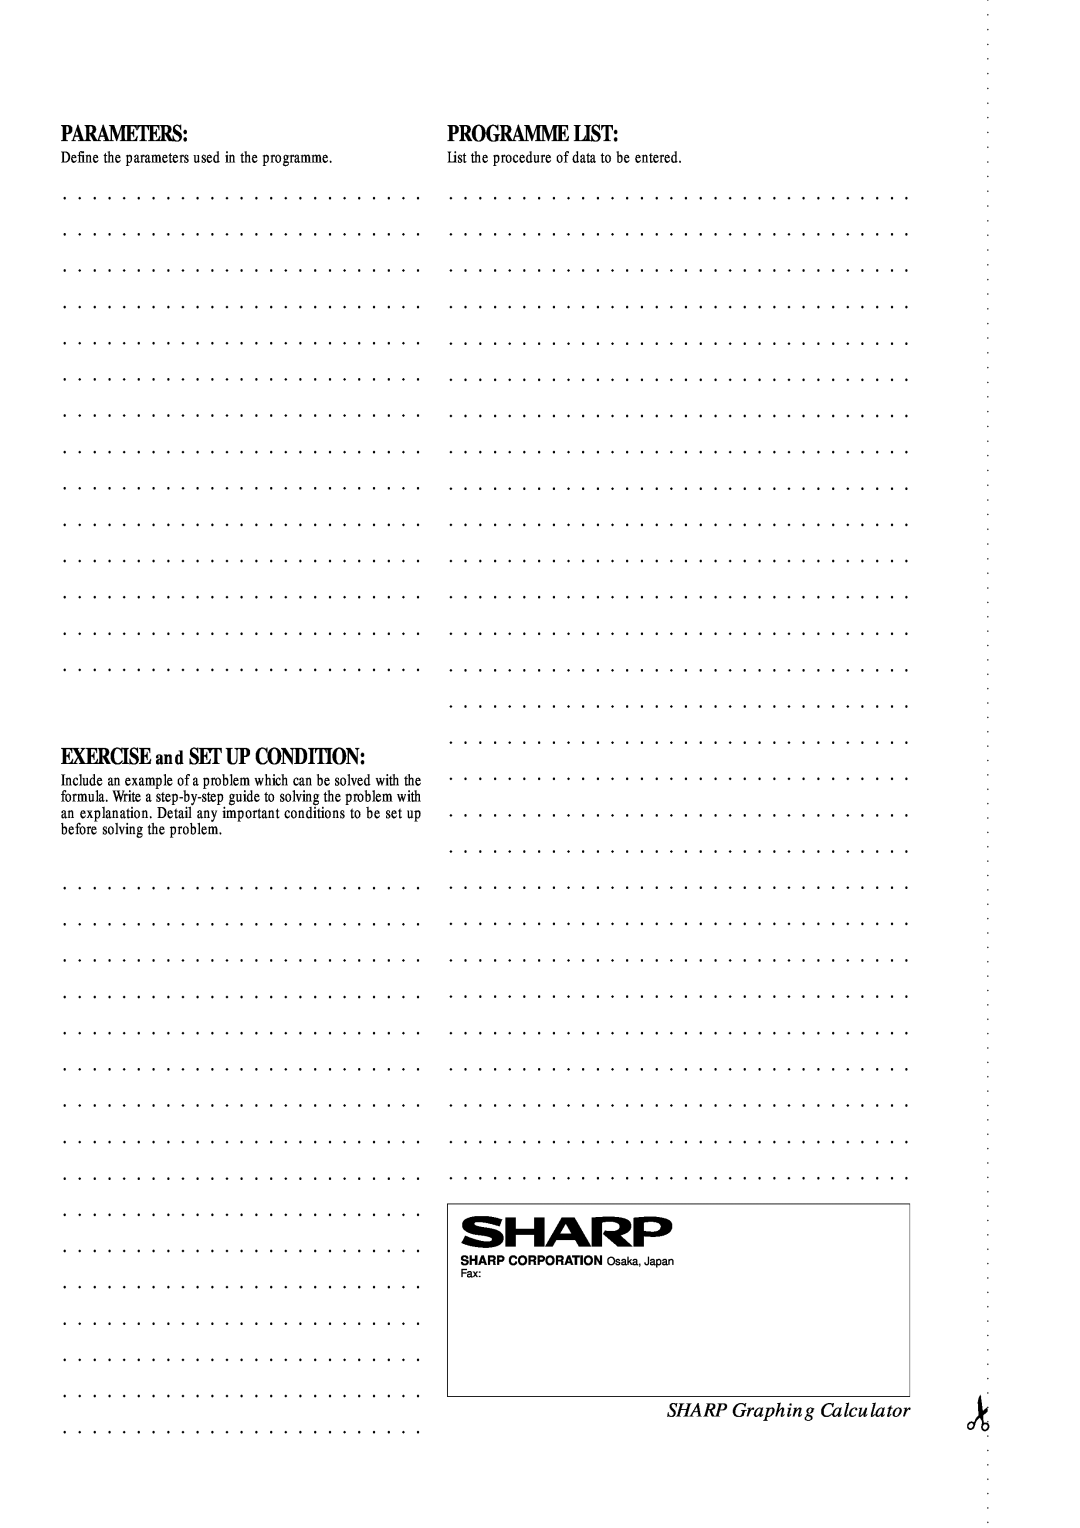 Sharp EL-9900 manual Parameters, Programme List, EXERCISE and SET UP CONDITION, SHARP Graphing Calculator 